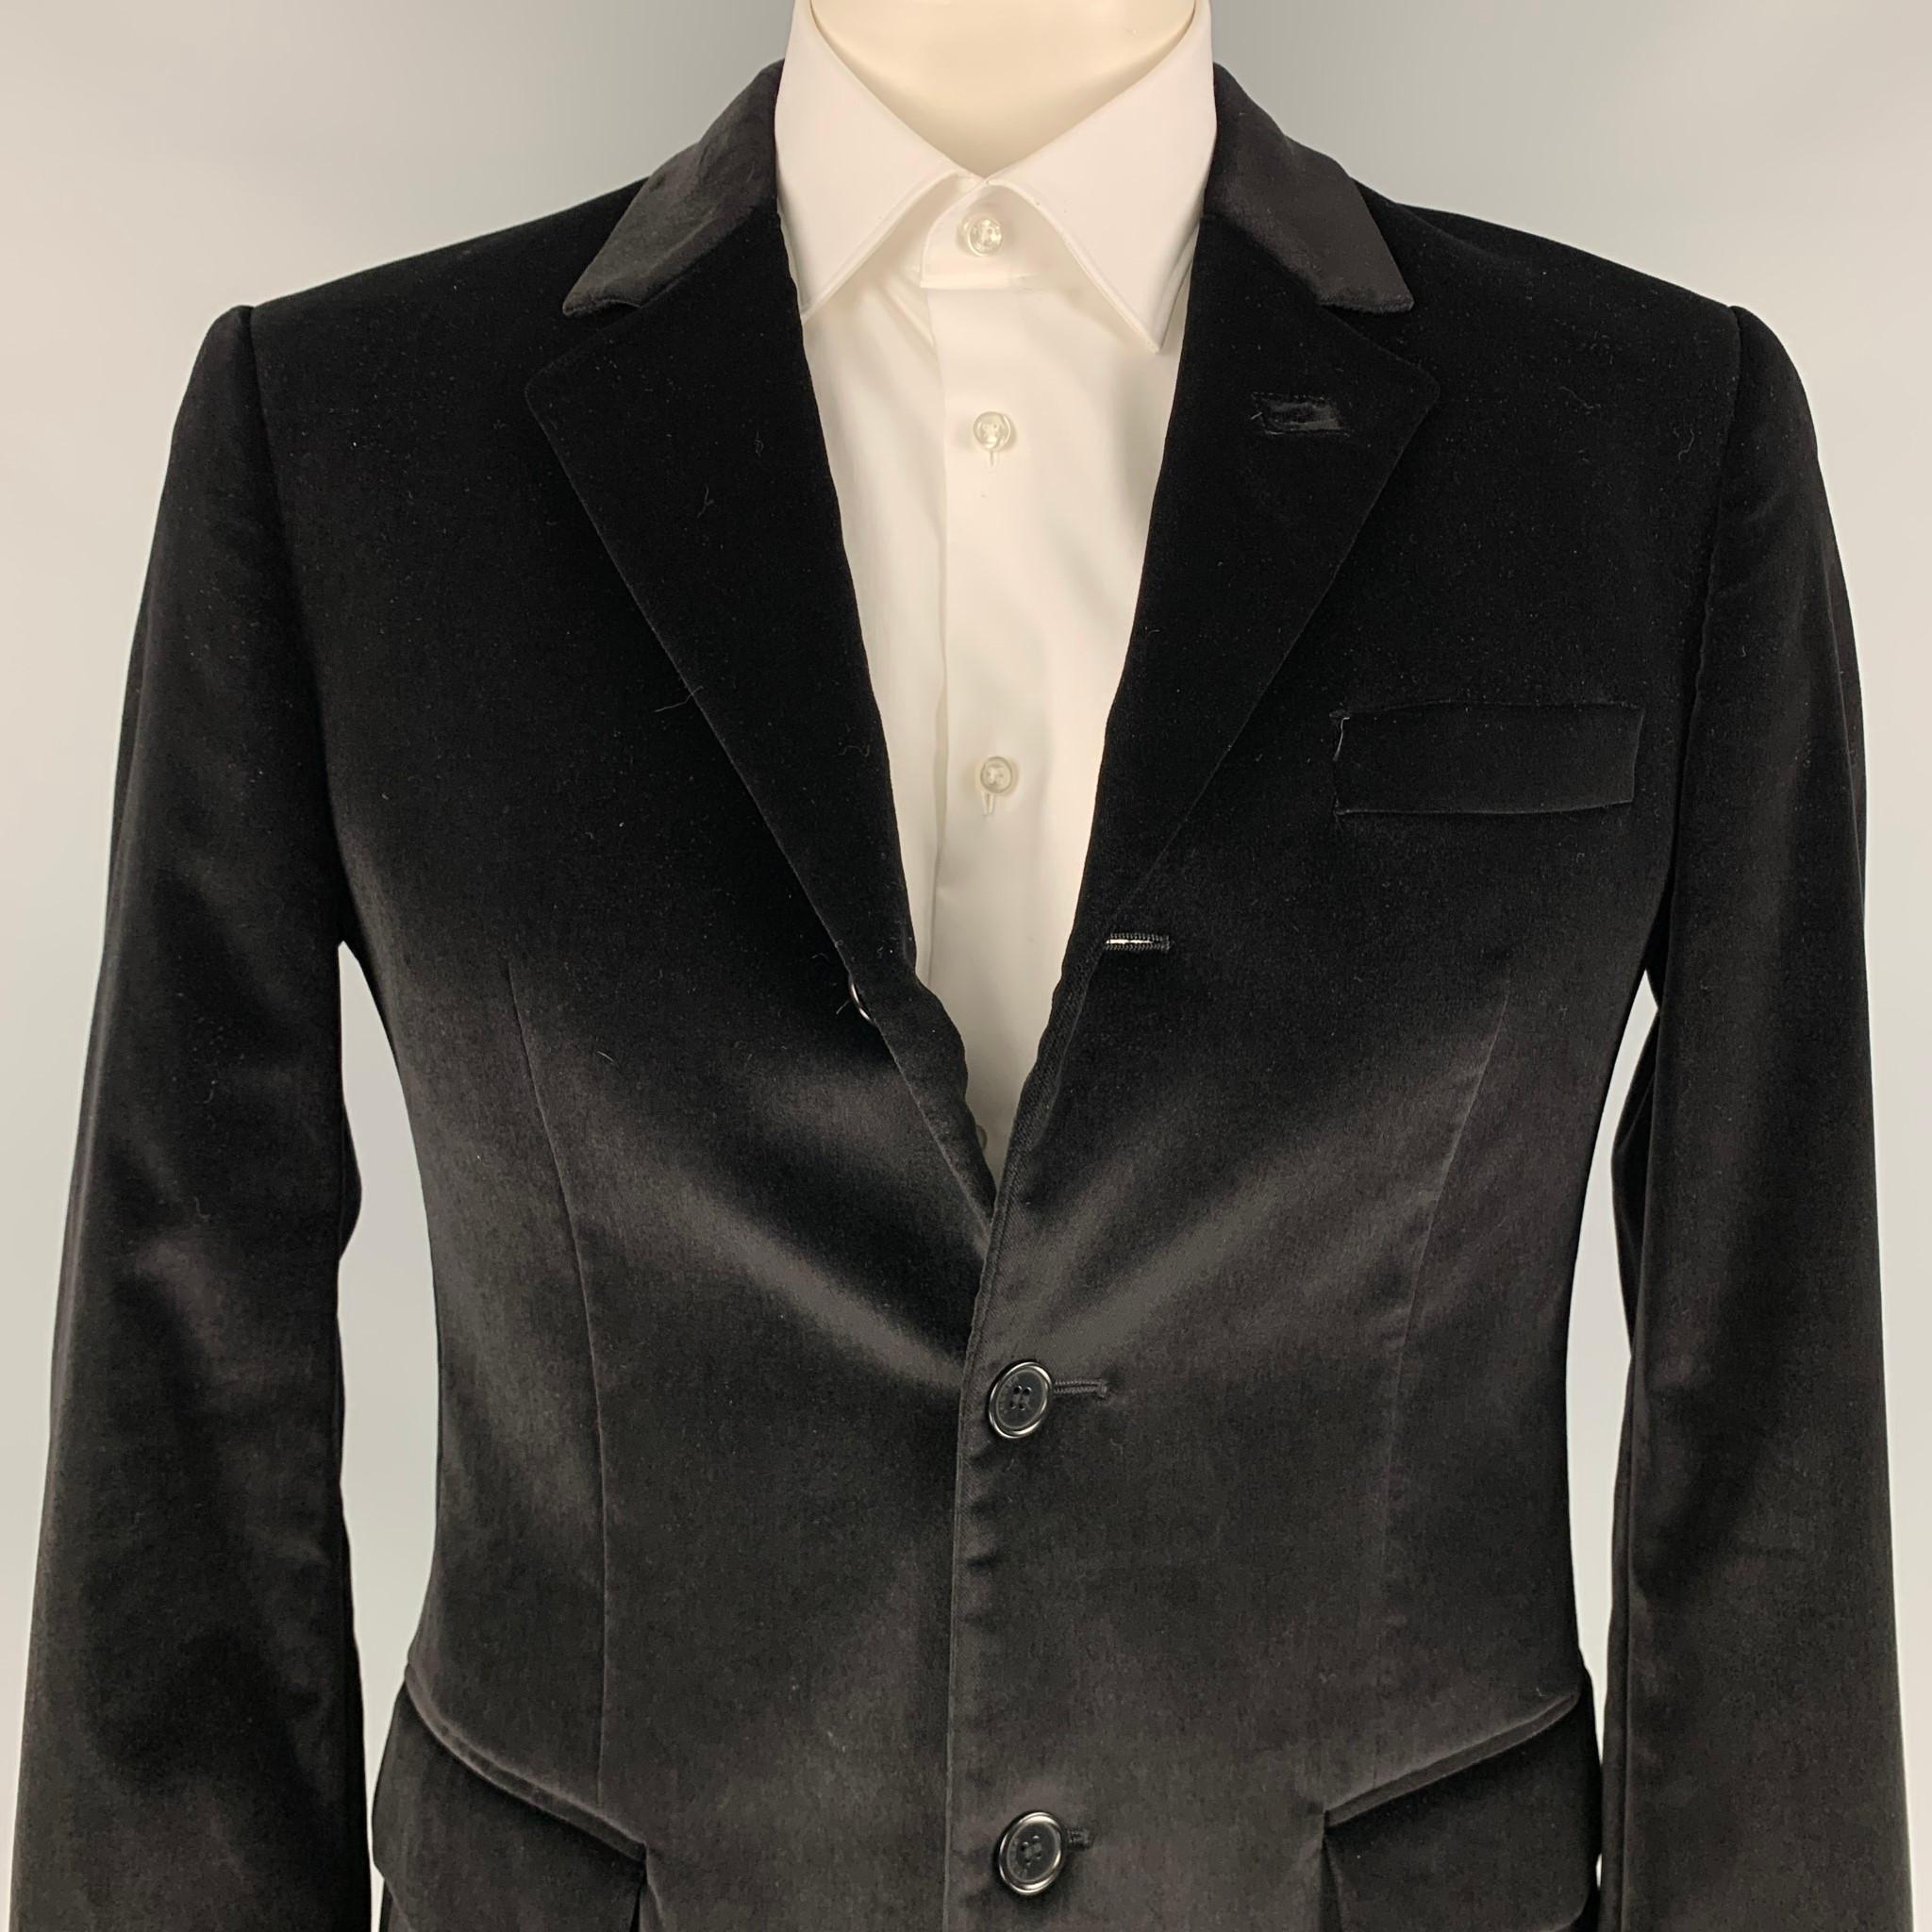 VERSUS by GIANNI VERSACE sport coat comes in a black cotton velvet with a full liner featuring a notch lapel, double back vent, flap pockets, and a three button closure. Made in Italy. 

Excellent Pre-Owned Condition.
Marked: